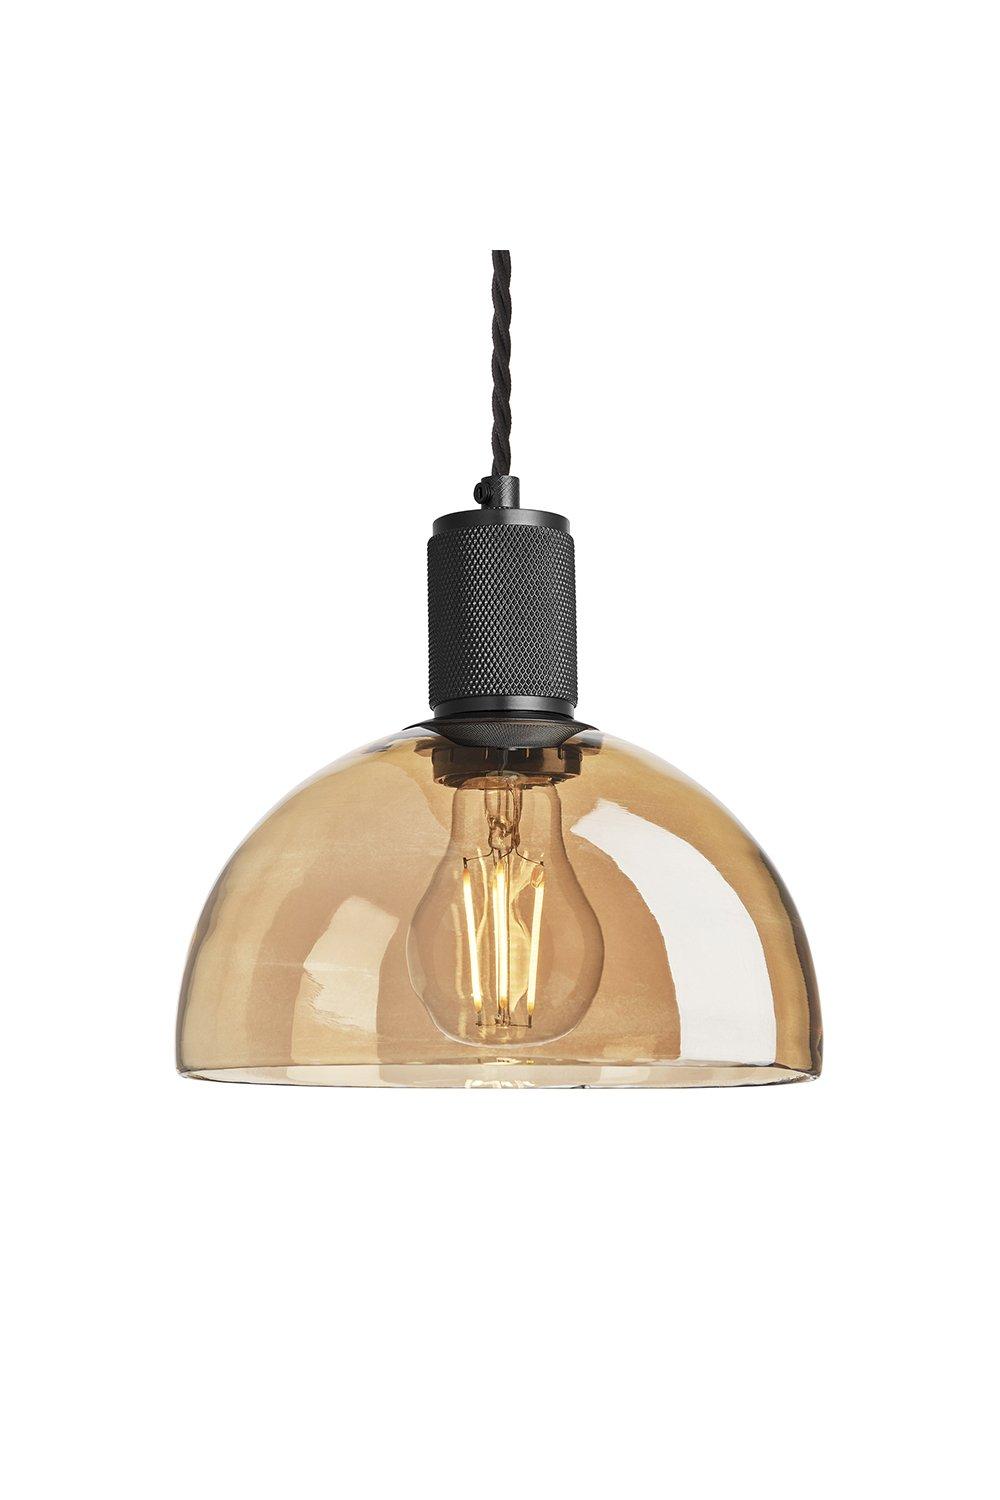 Knurled Tinted Glass Dome Pendant Light, 8 Inch, Amber, Black Holder